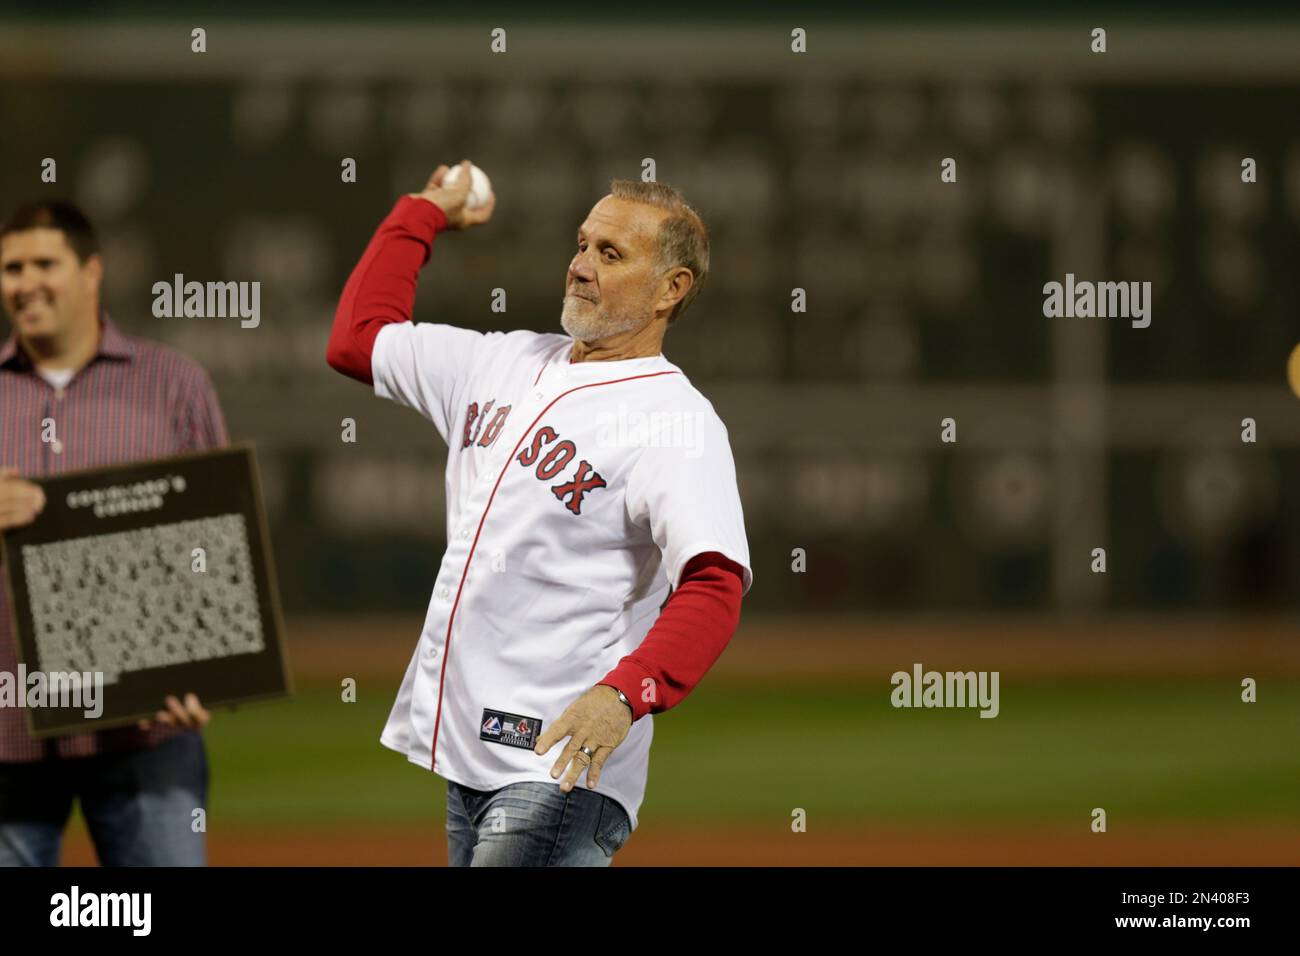 Tony Conigliaro Boston Red Sox Center fielder is greeted at home